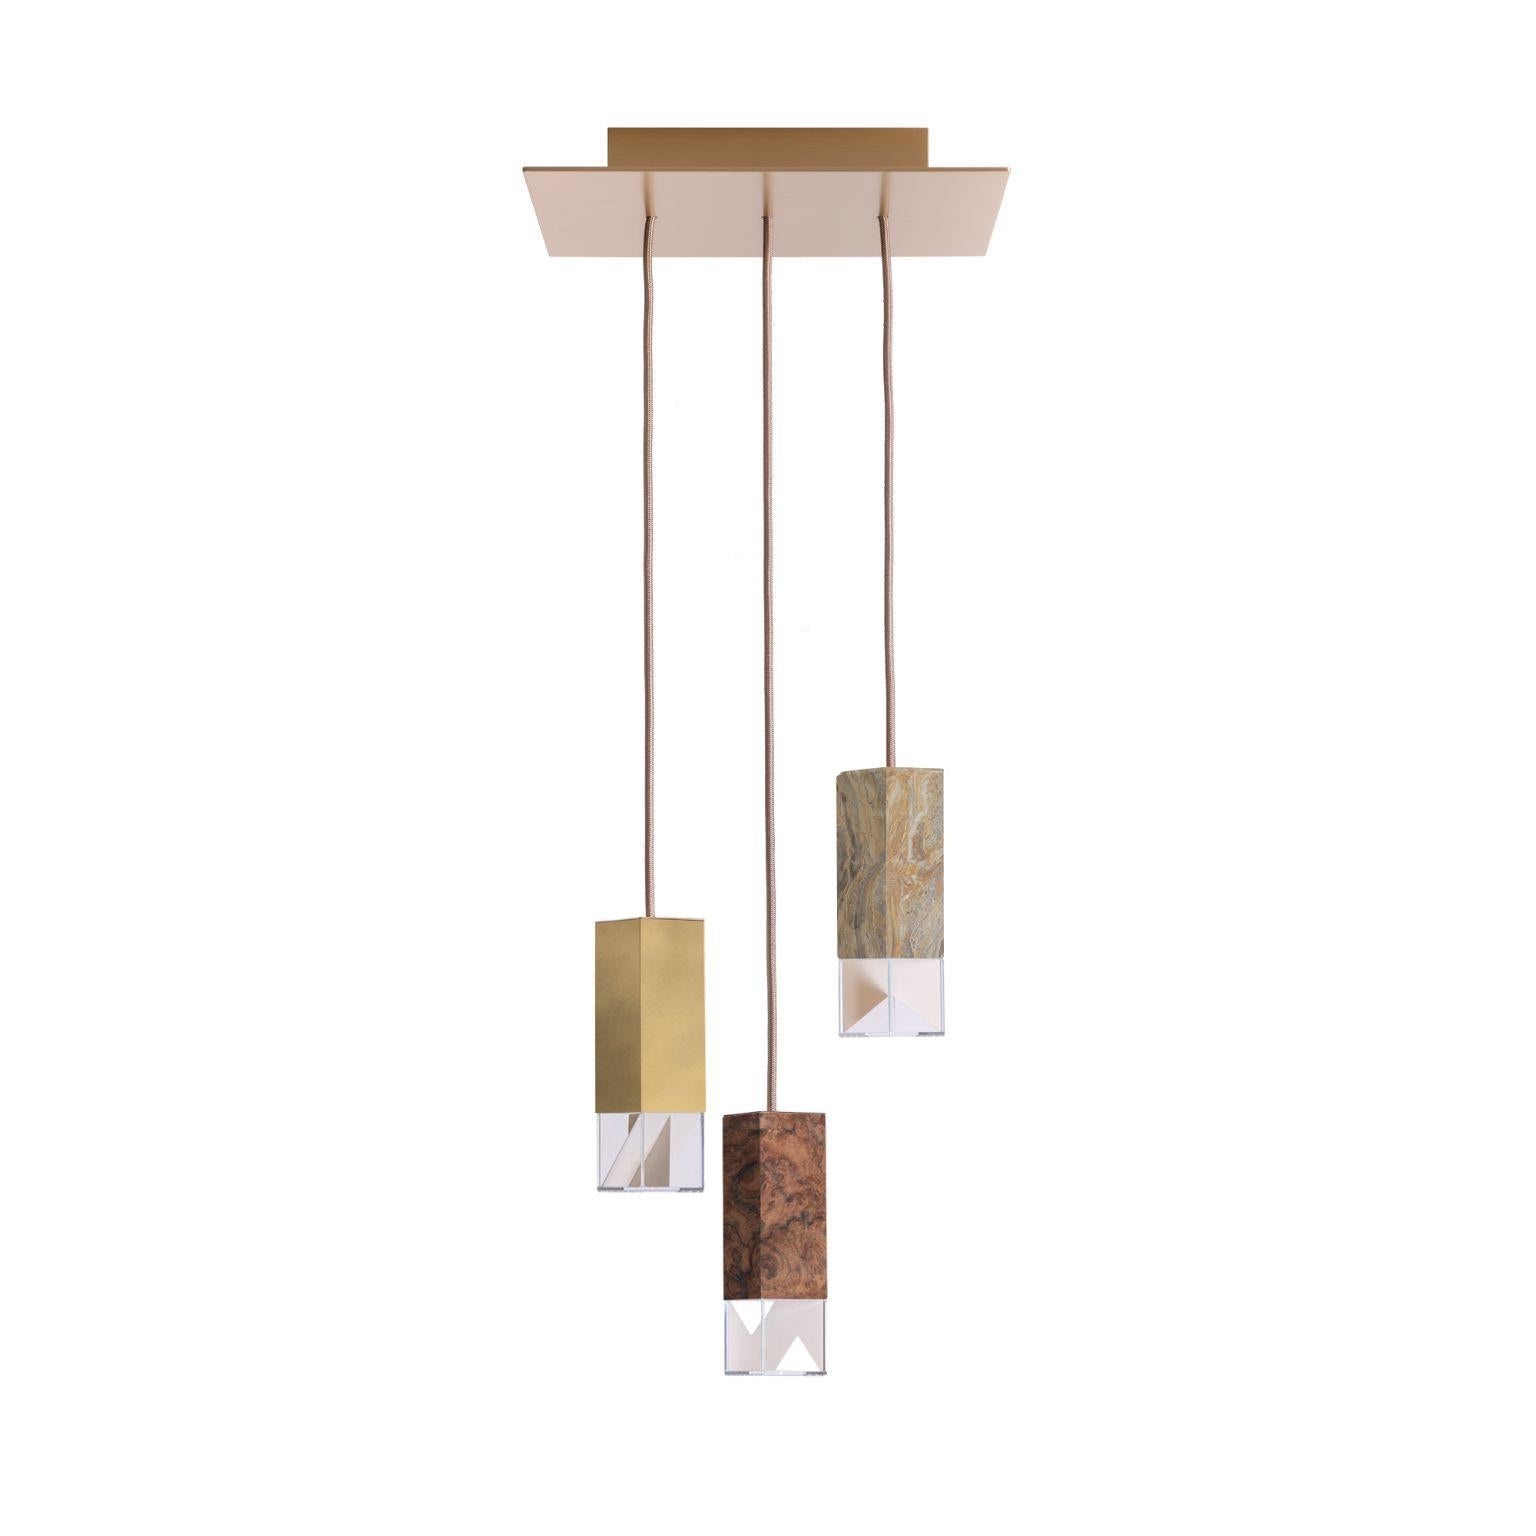 Lamp one collection chandelier 02 by Formaminima.
Dimensions: D 30 x W 30 x H 68 cm.
Materials: body lamps: handcrafted solid Arabescato Orobico grey and orange,
polished finish; solid burnished brushed brass matt satin finish; walnut briarwood,